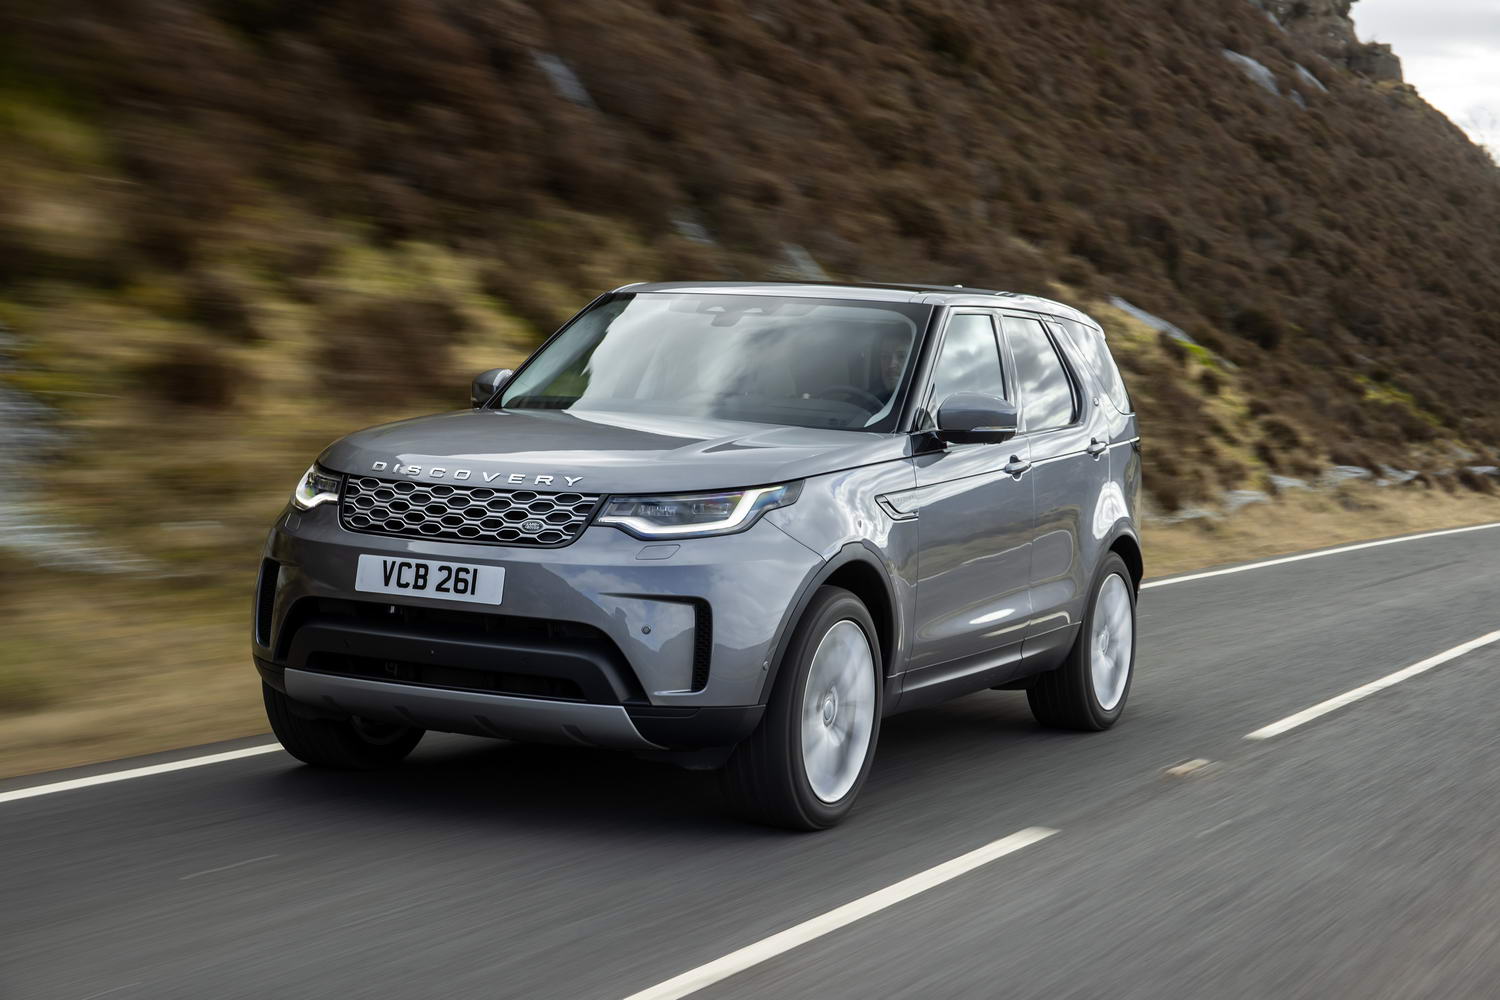 Car Reviews | Land Rover Discovery | CompleteCar.ie